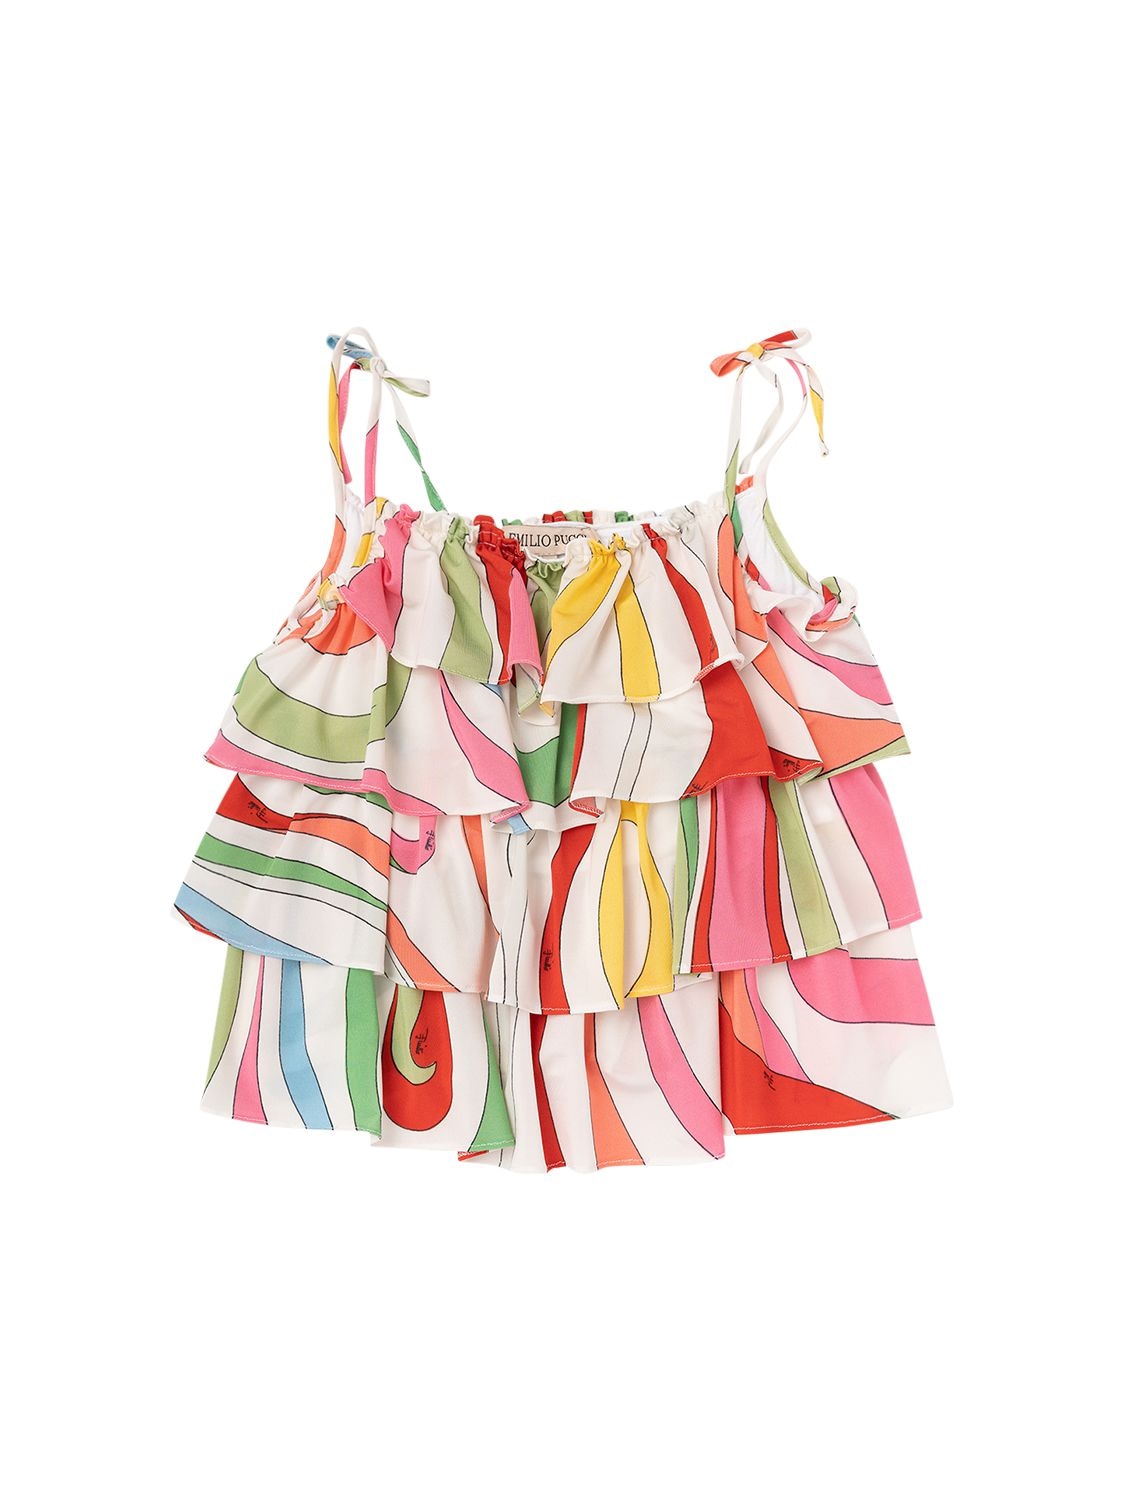 Pucci Kids' Printed Ruffle Top In Multicolor